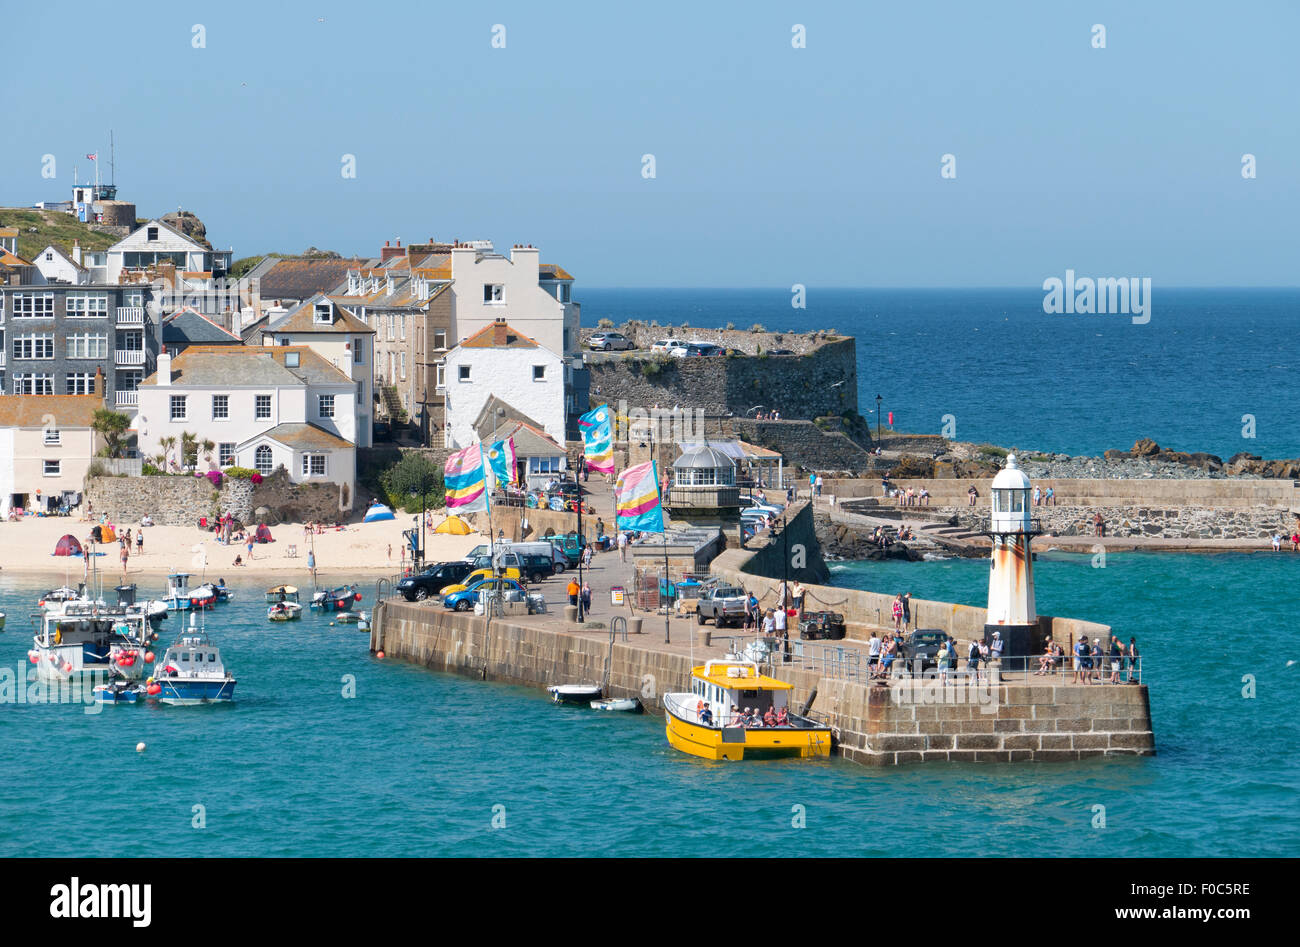 St. Ives Cornish seaside town, Smeatons Pier and harbour beach, Cornwall England. Stock Photo